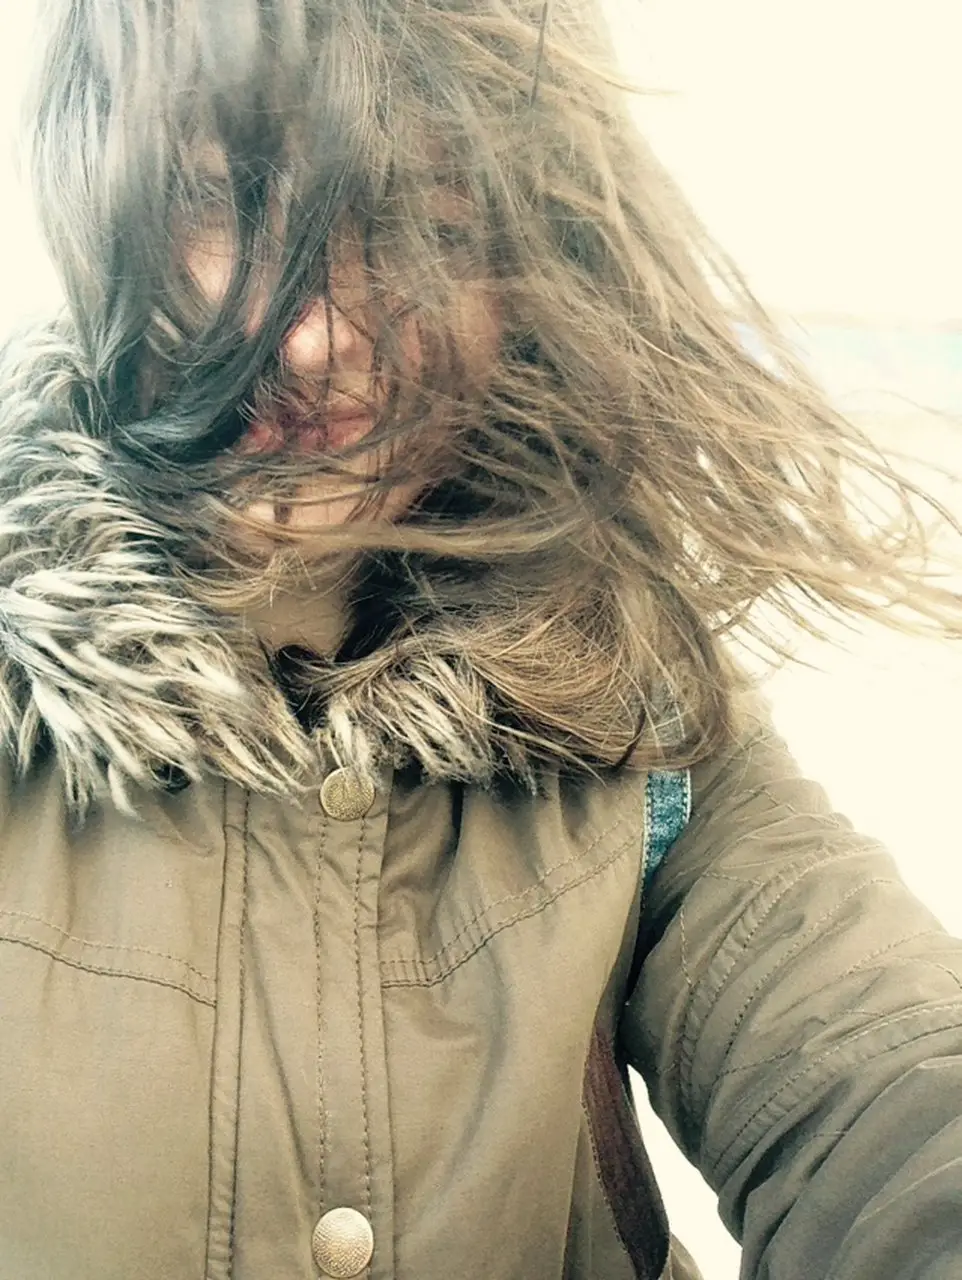 Ella, in a big coat, attempting to take a selfie on a Mersey River cruise in winter. Her hair is covering her entire face because the wind was so strong